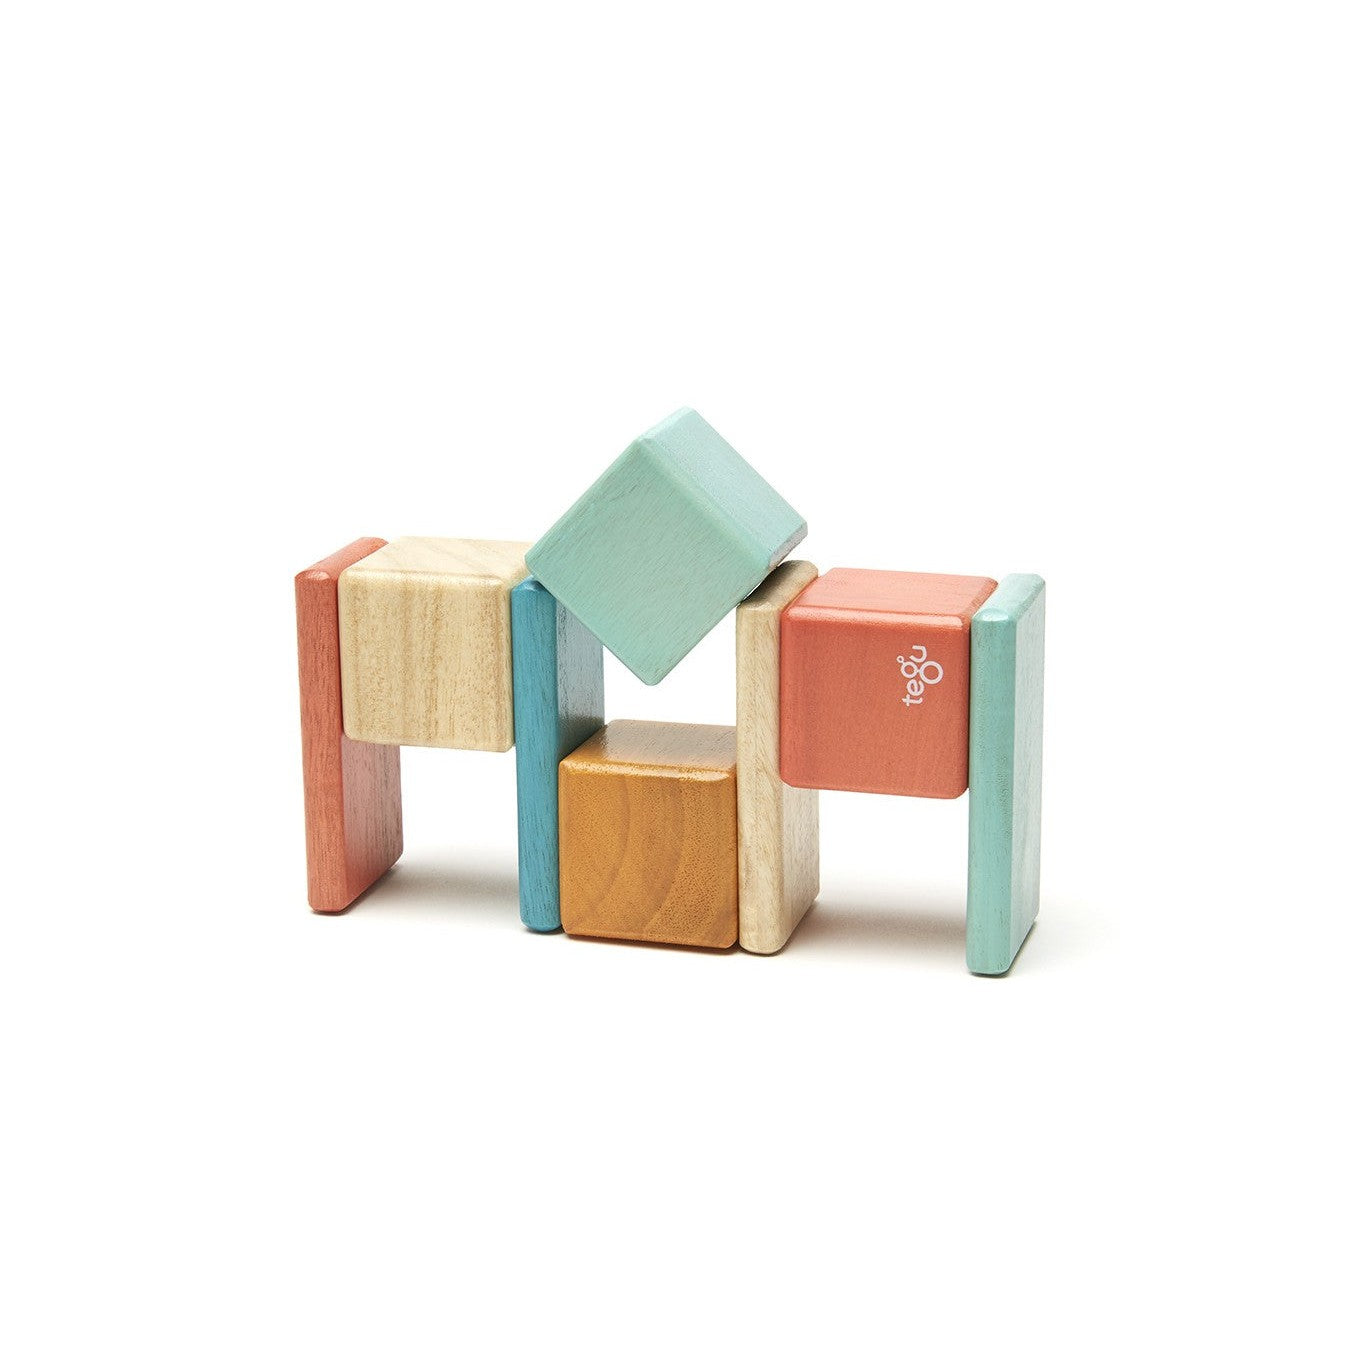 Robo Magnetic Wooden Blocks Future Collection 8 pieces at Tegu Toys